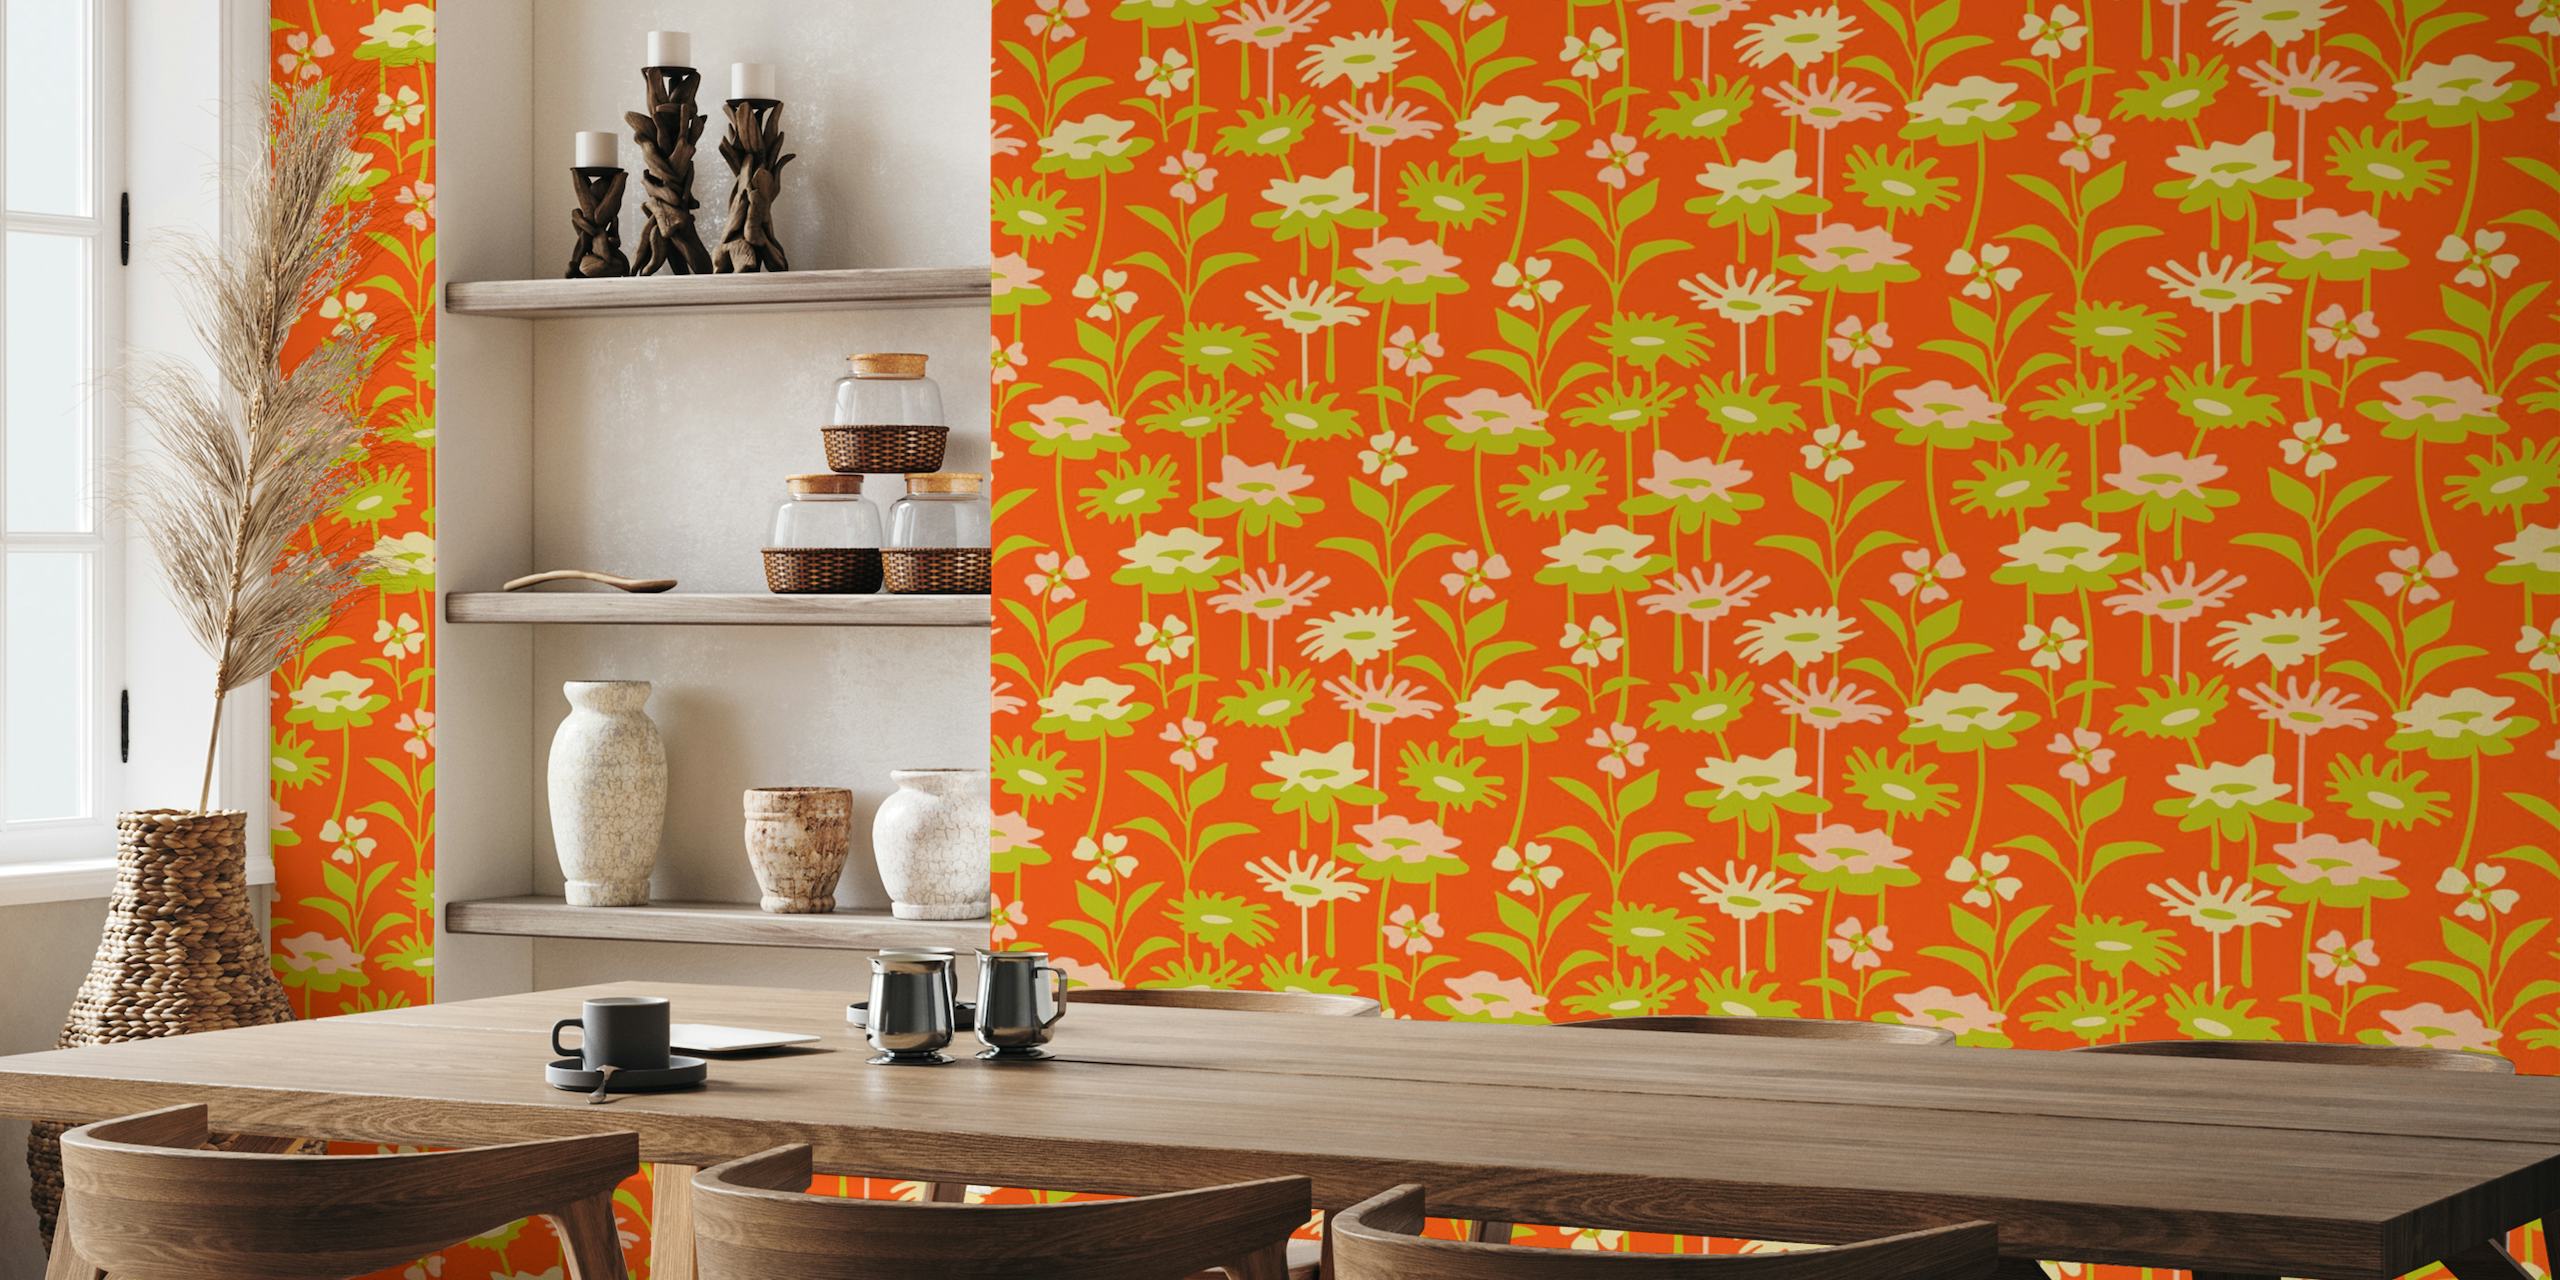 GARDEN MEADOW Retro Floral wall mural with green, orange, and pink flowers on a vibrant orange background